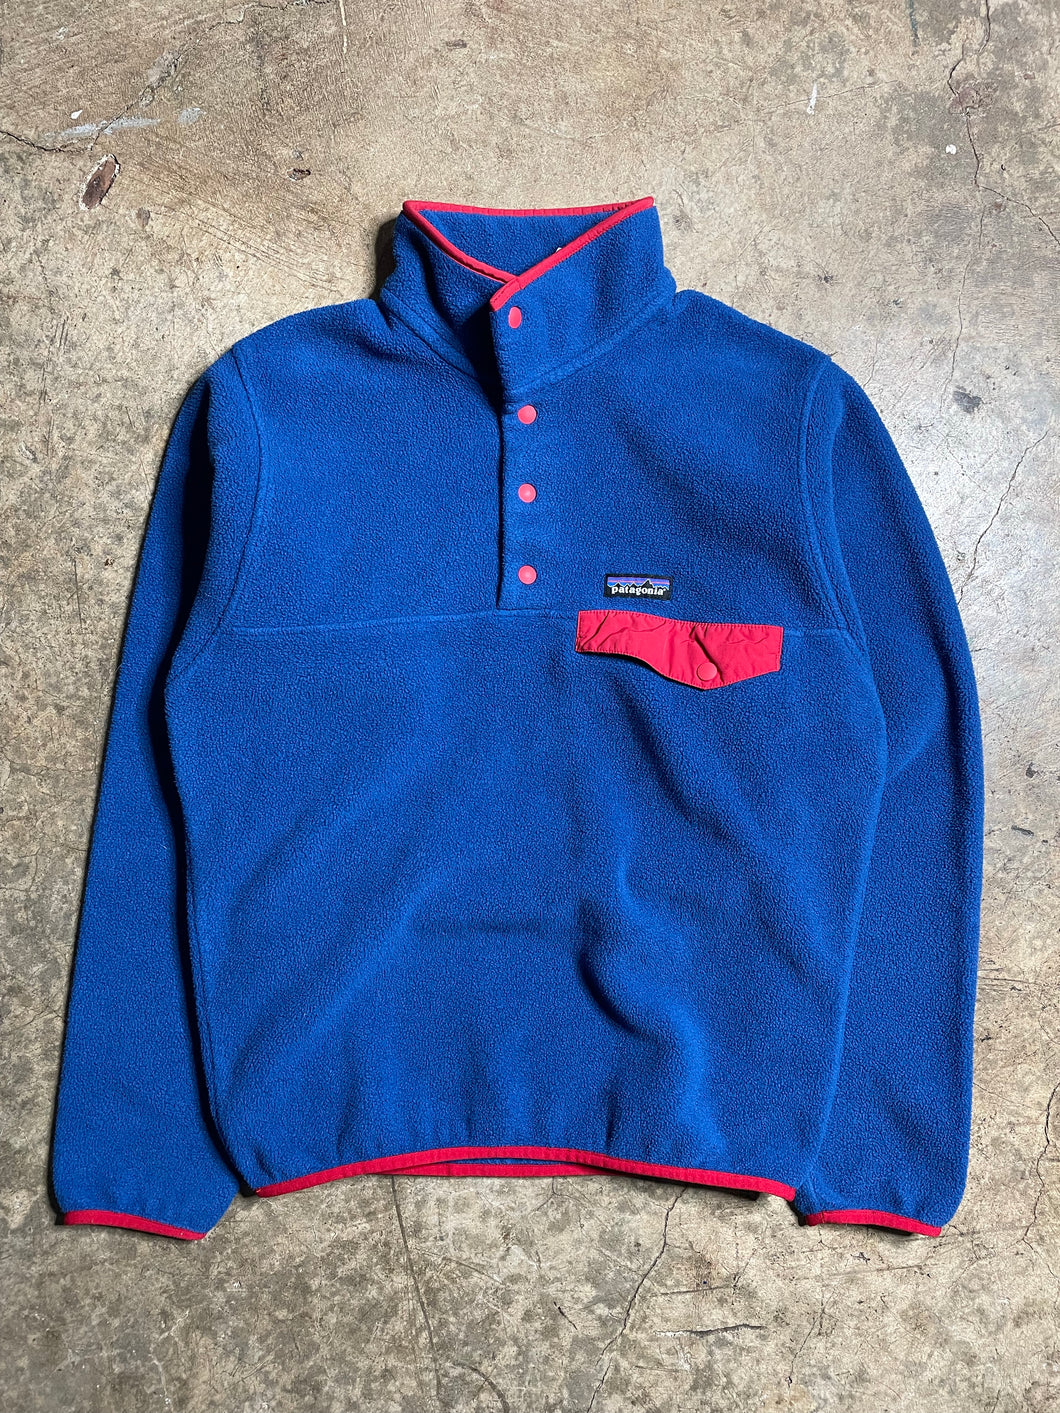 Y2K Blue & Red Patagonia Synchilla - XS/S